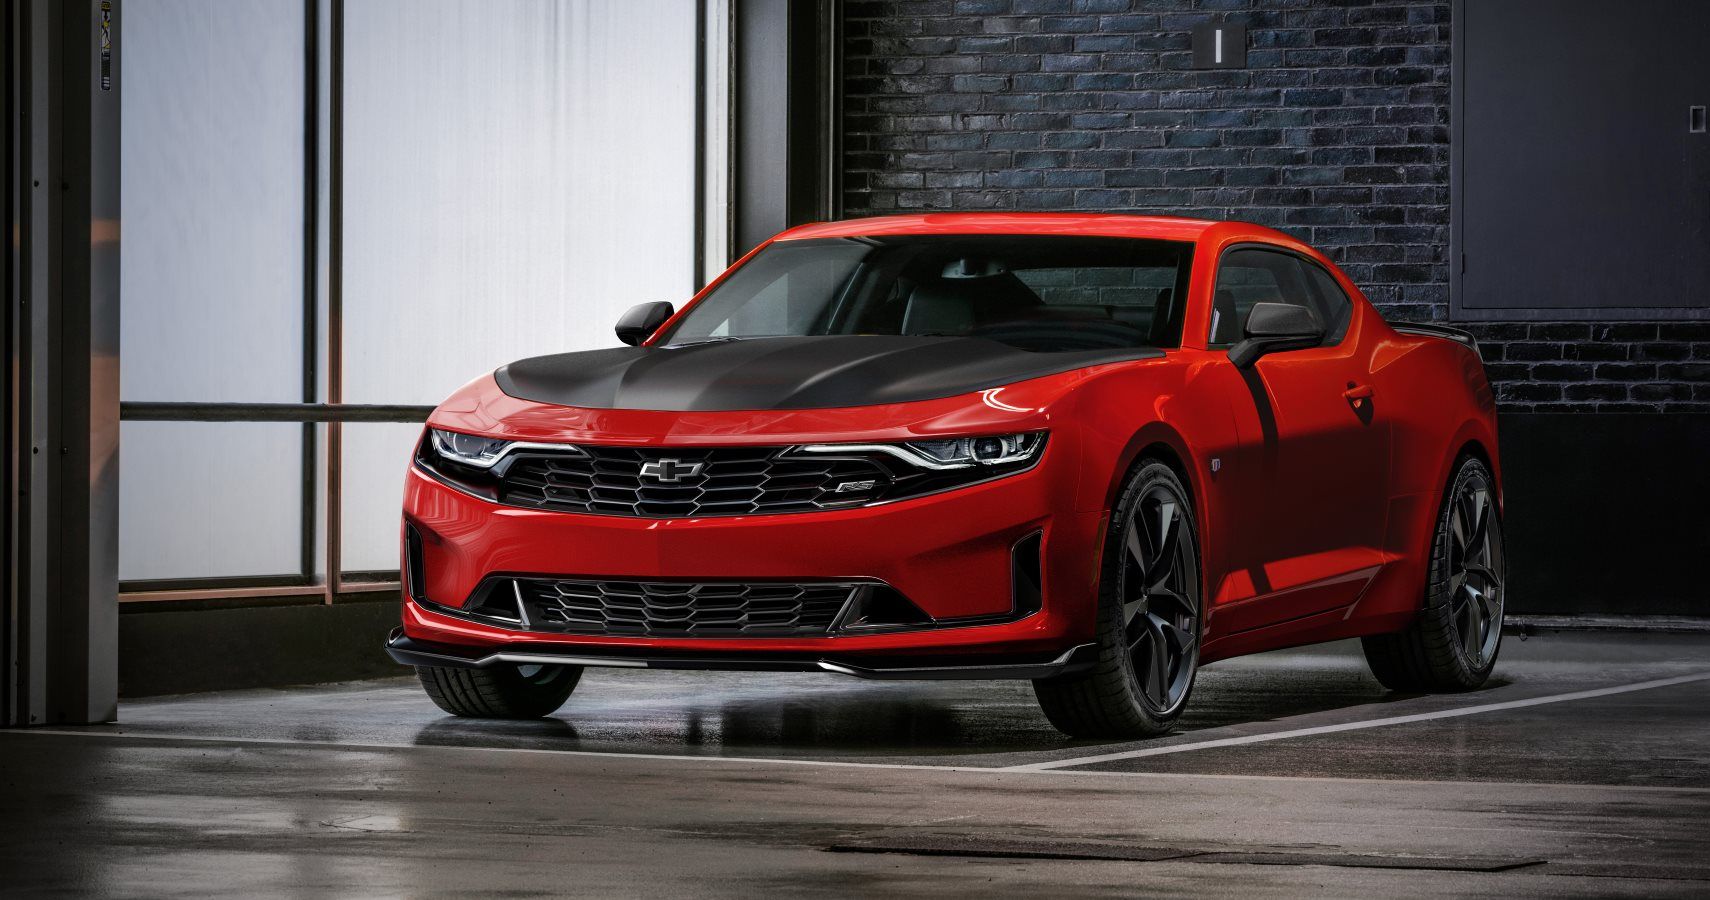 2019 Chevrolet Camaro 1LE 4-cylinder - Red, Front 3/4 View